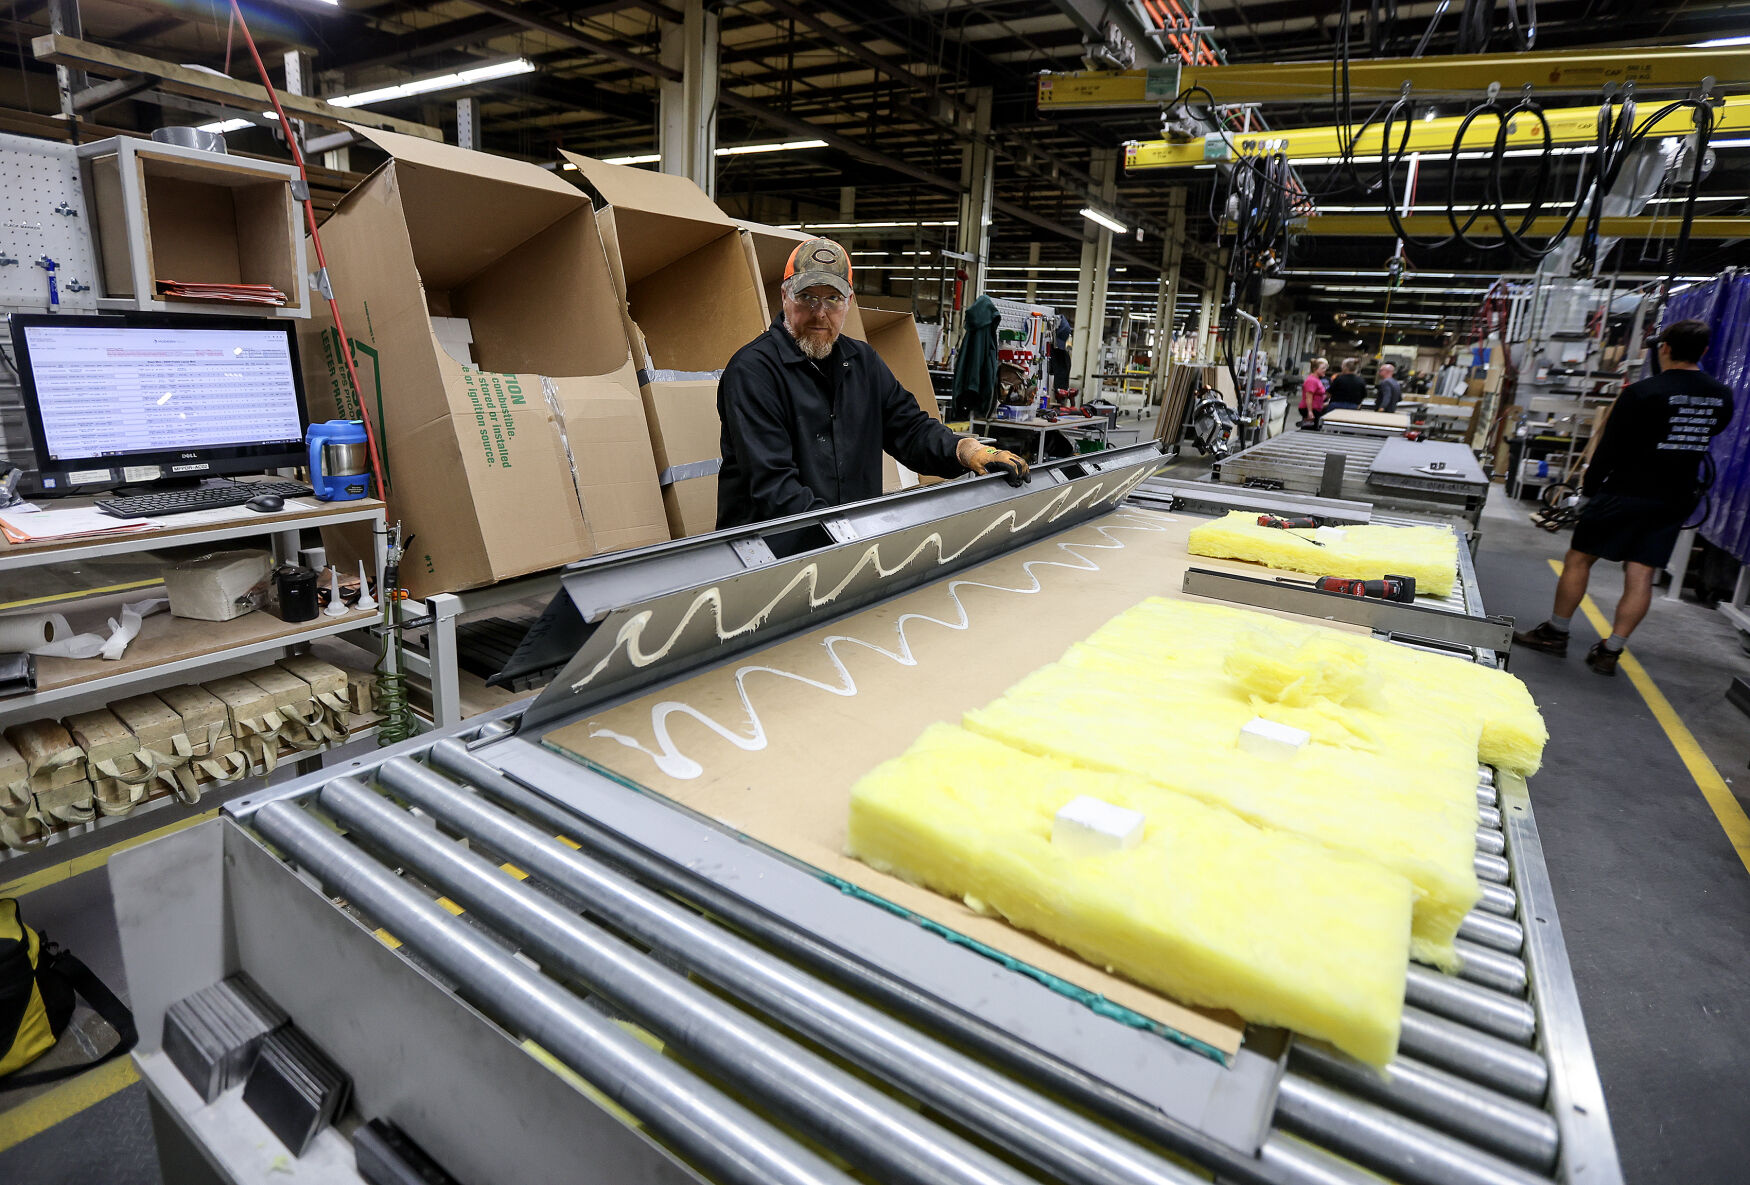 Modernfold employee Mike Ernzen works on putting together a product on one of the many assembly lines at the Dyersville, Iowa, plant recently.    PHOTO CREDIT: Dave Kettering